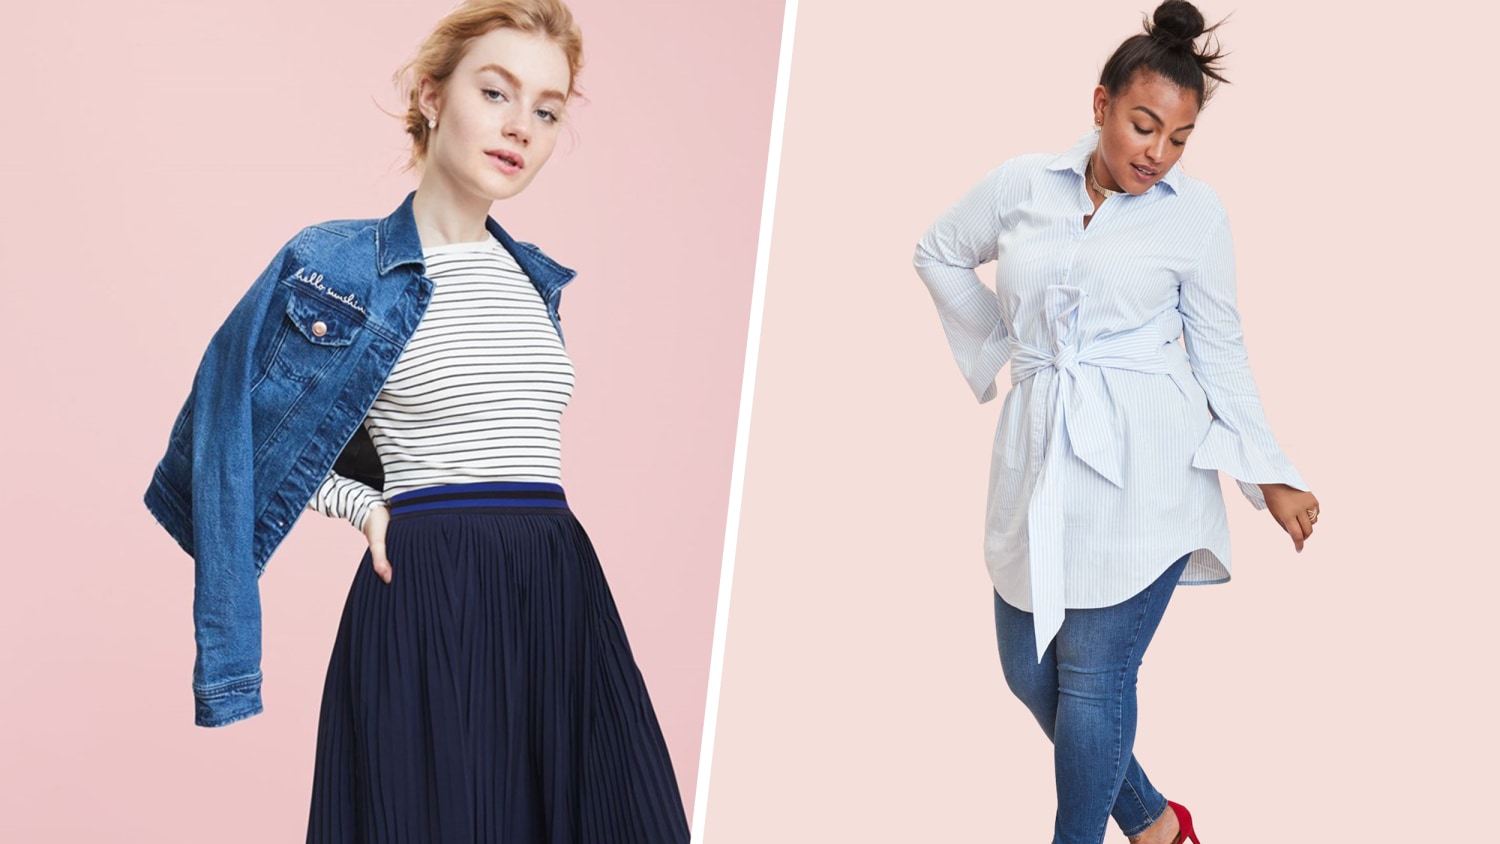 A New Day: Target's new women's clothing line for all sizes